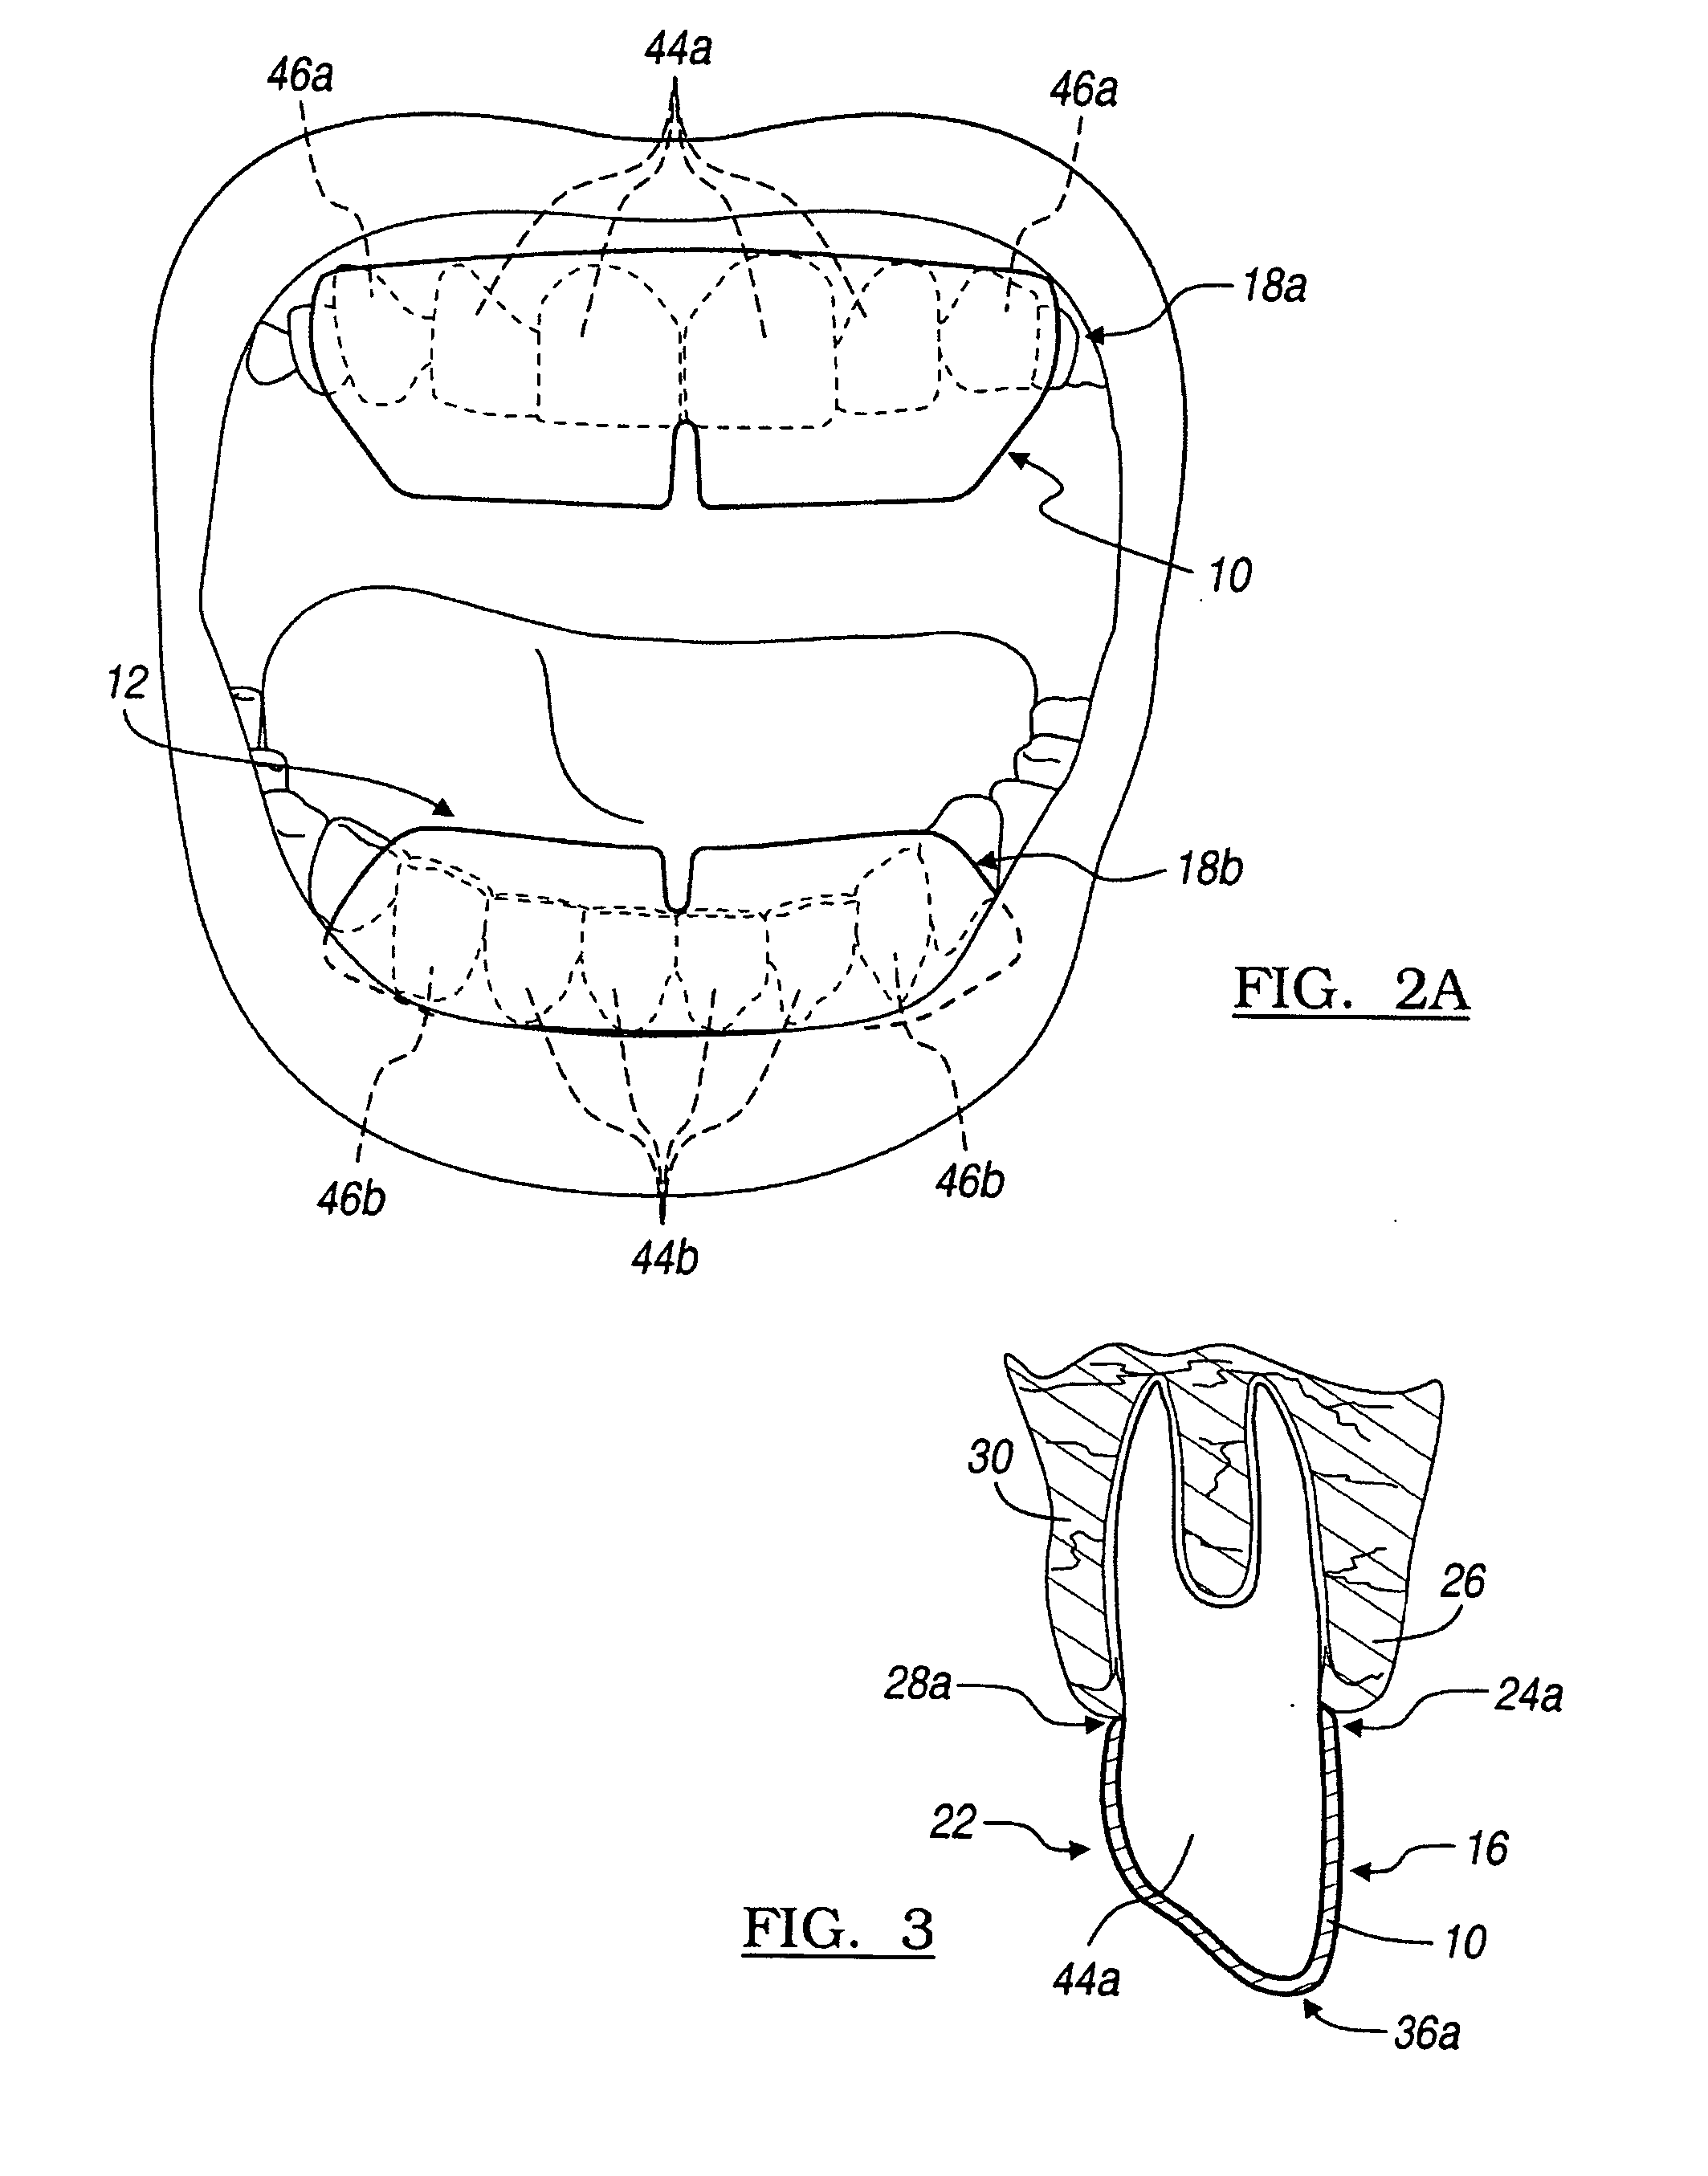 Carrier strip for application to oral surfaces and related methods